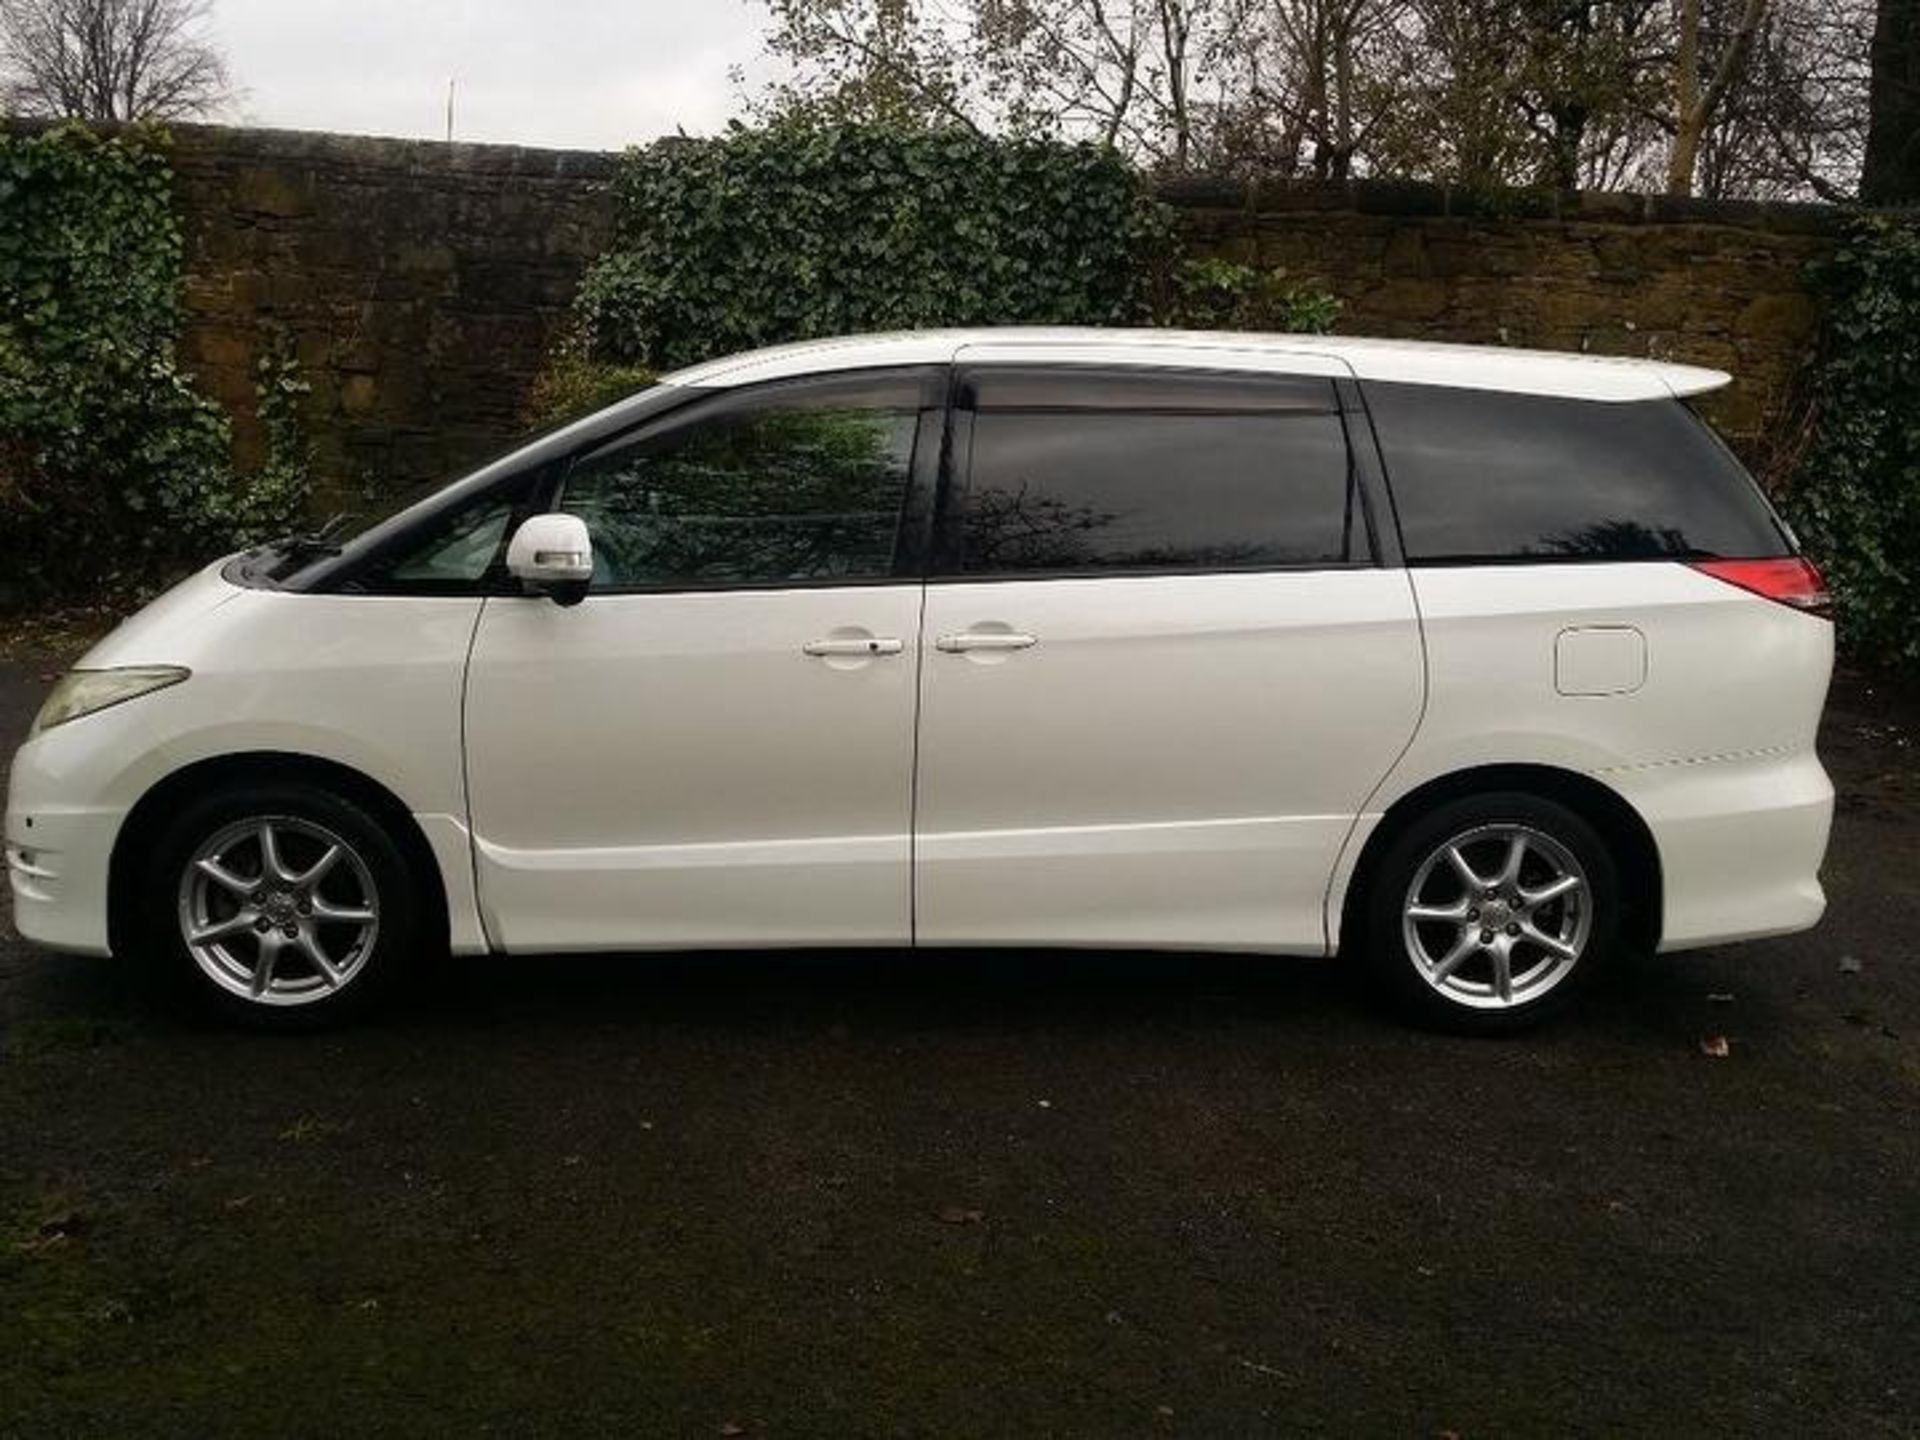 TOYOTA, ESTIMA 2-4 MPV, PA06 AKO, 2-4 LTR, PETROL, AUTOMATIC 7 SPEED, 5 DOOR MPV, IMPORTED FIRST - Image 8 of 27